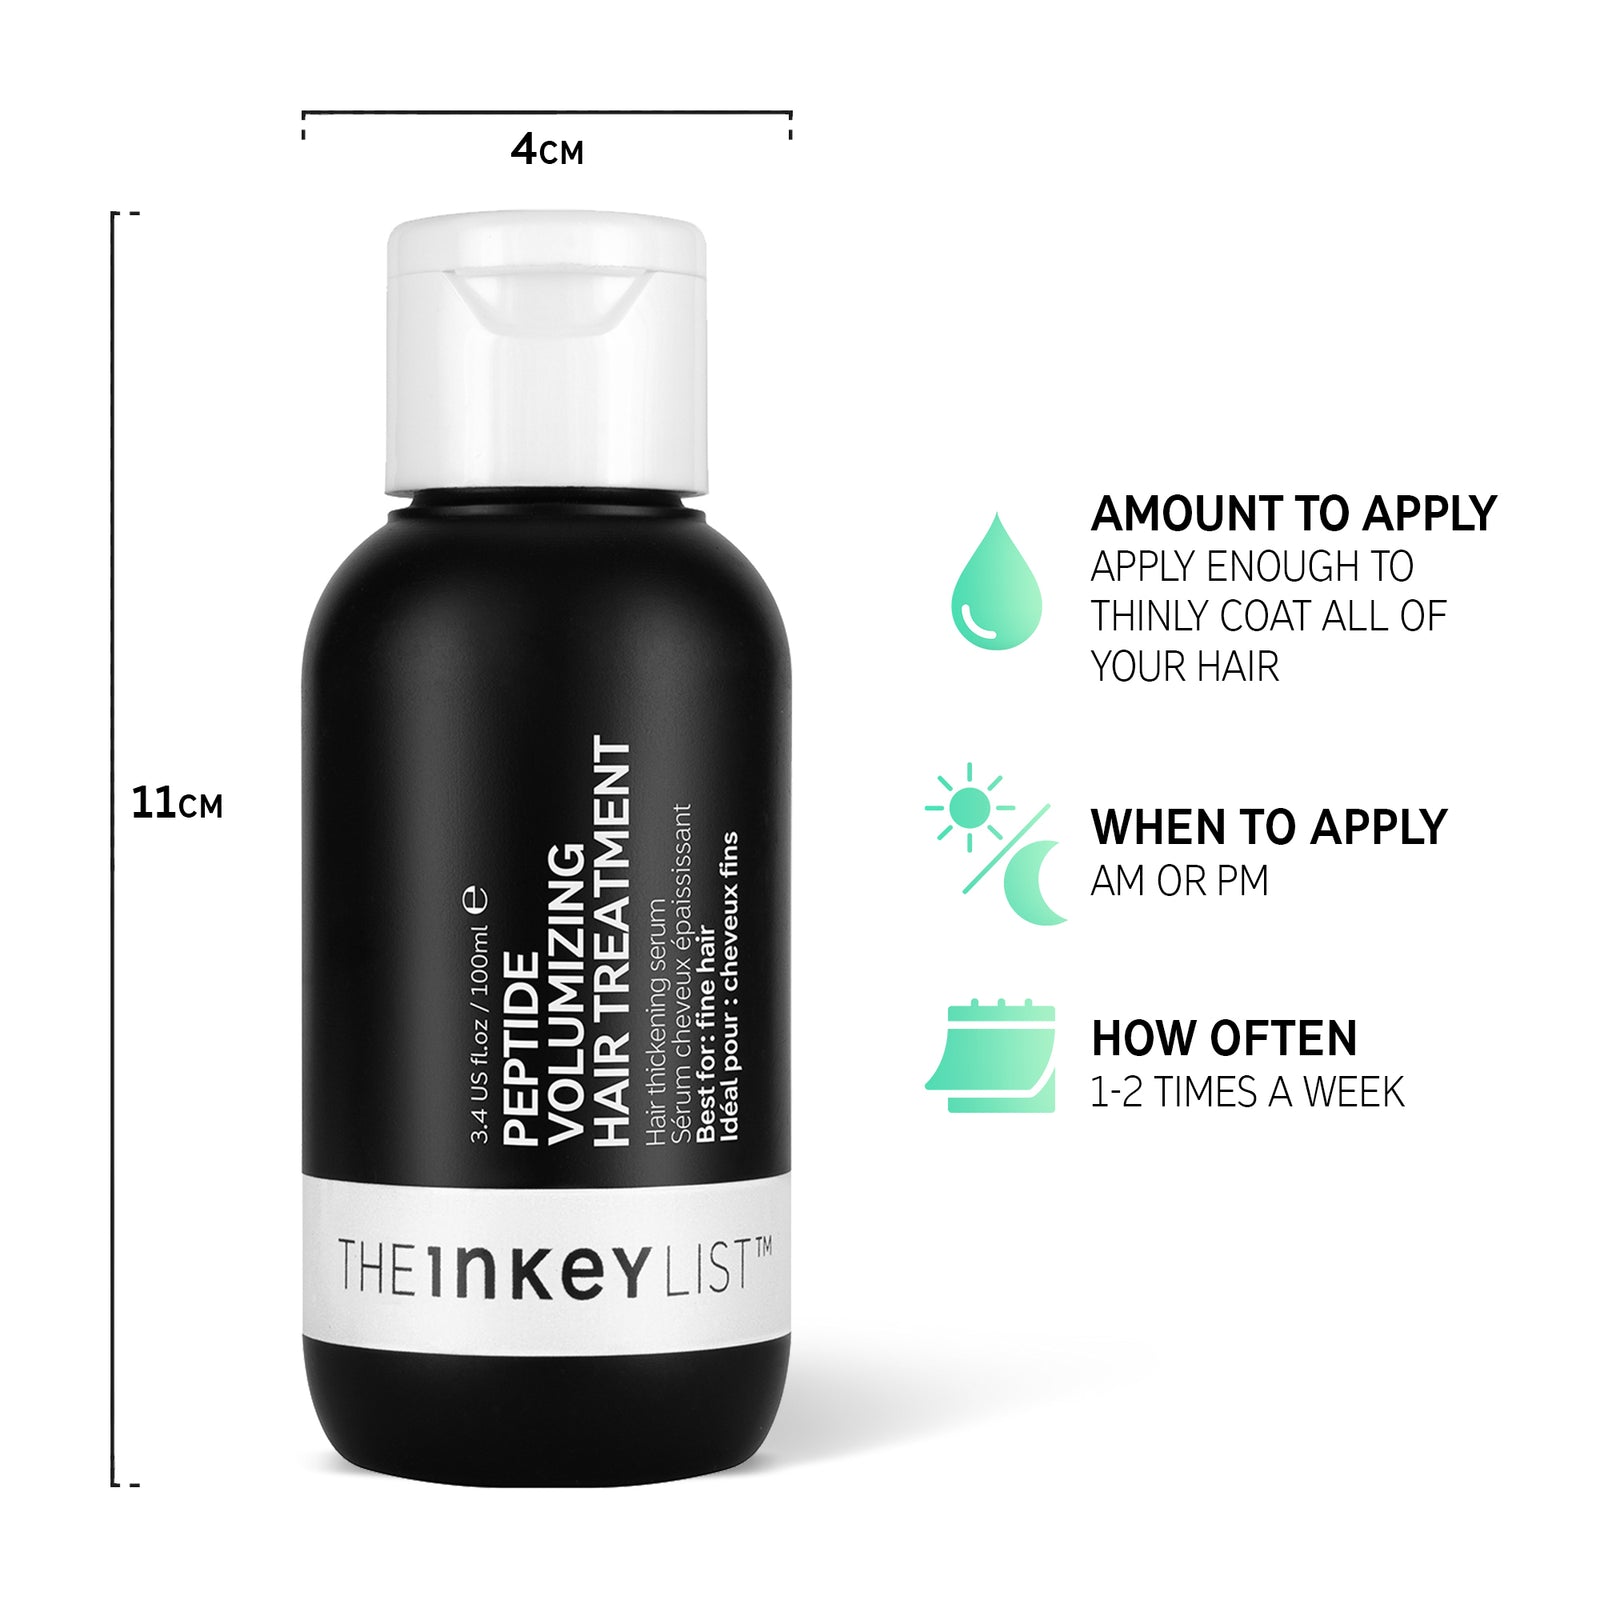 Hair Growth & Volume Duo Peptide hair bottle infographic with bottle dimensions with text that reads 'amount to apply (enough to thinly coat all of your hair), when to apply (AM or PM), how often to apply (1-2 times a week)'